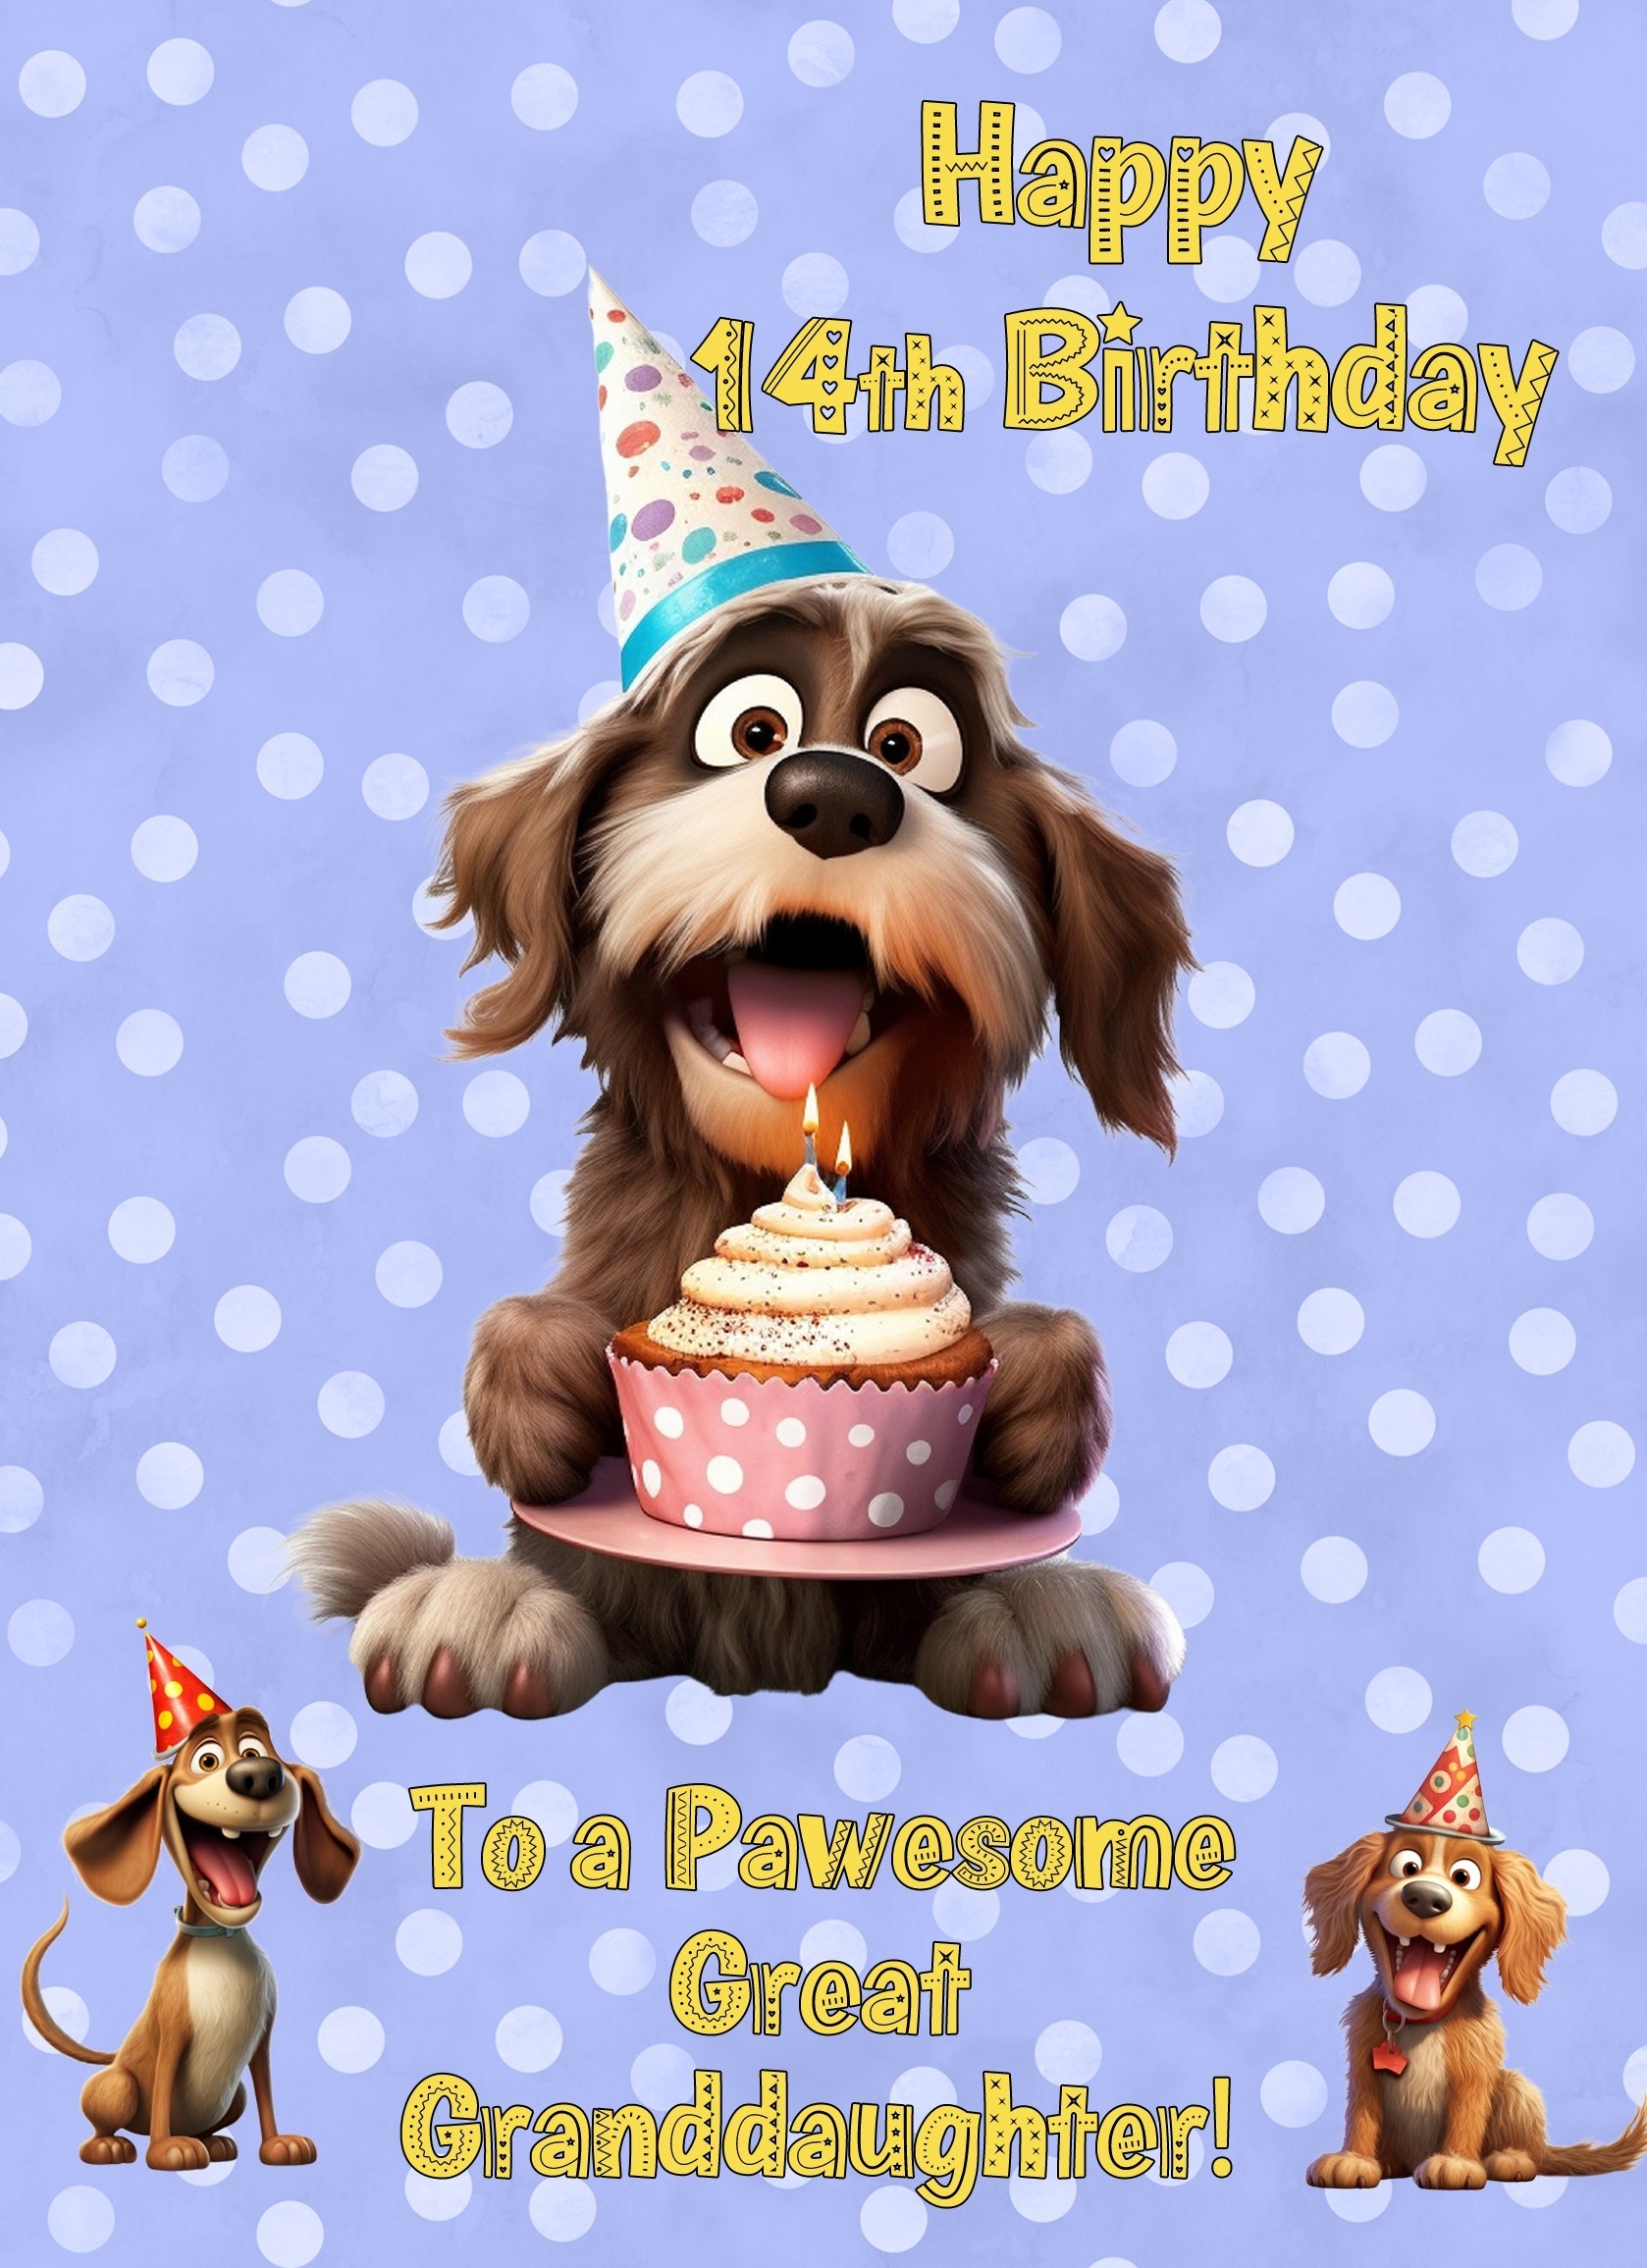 Great Granddaughter 14th Birthday Card (Funny Dog Humour)